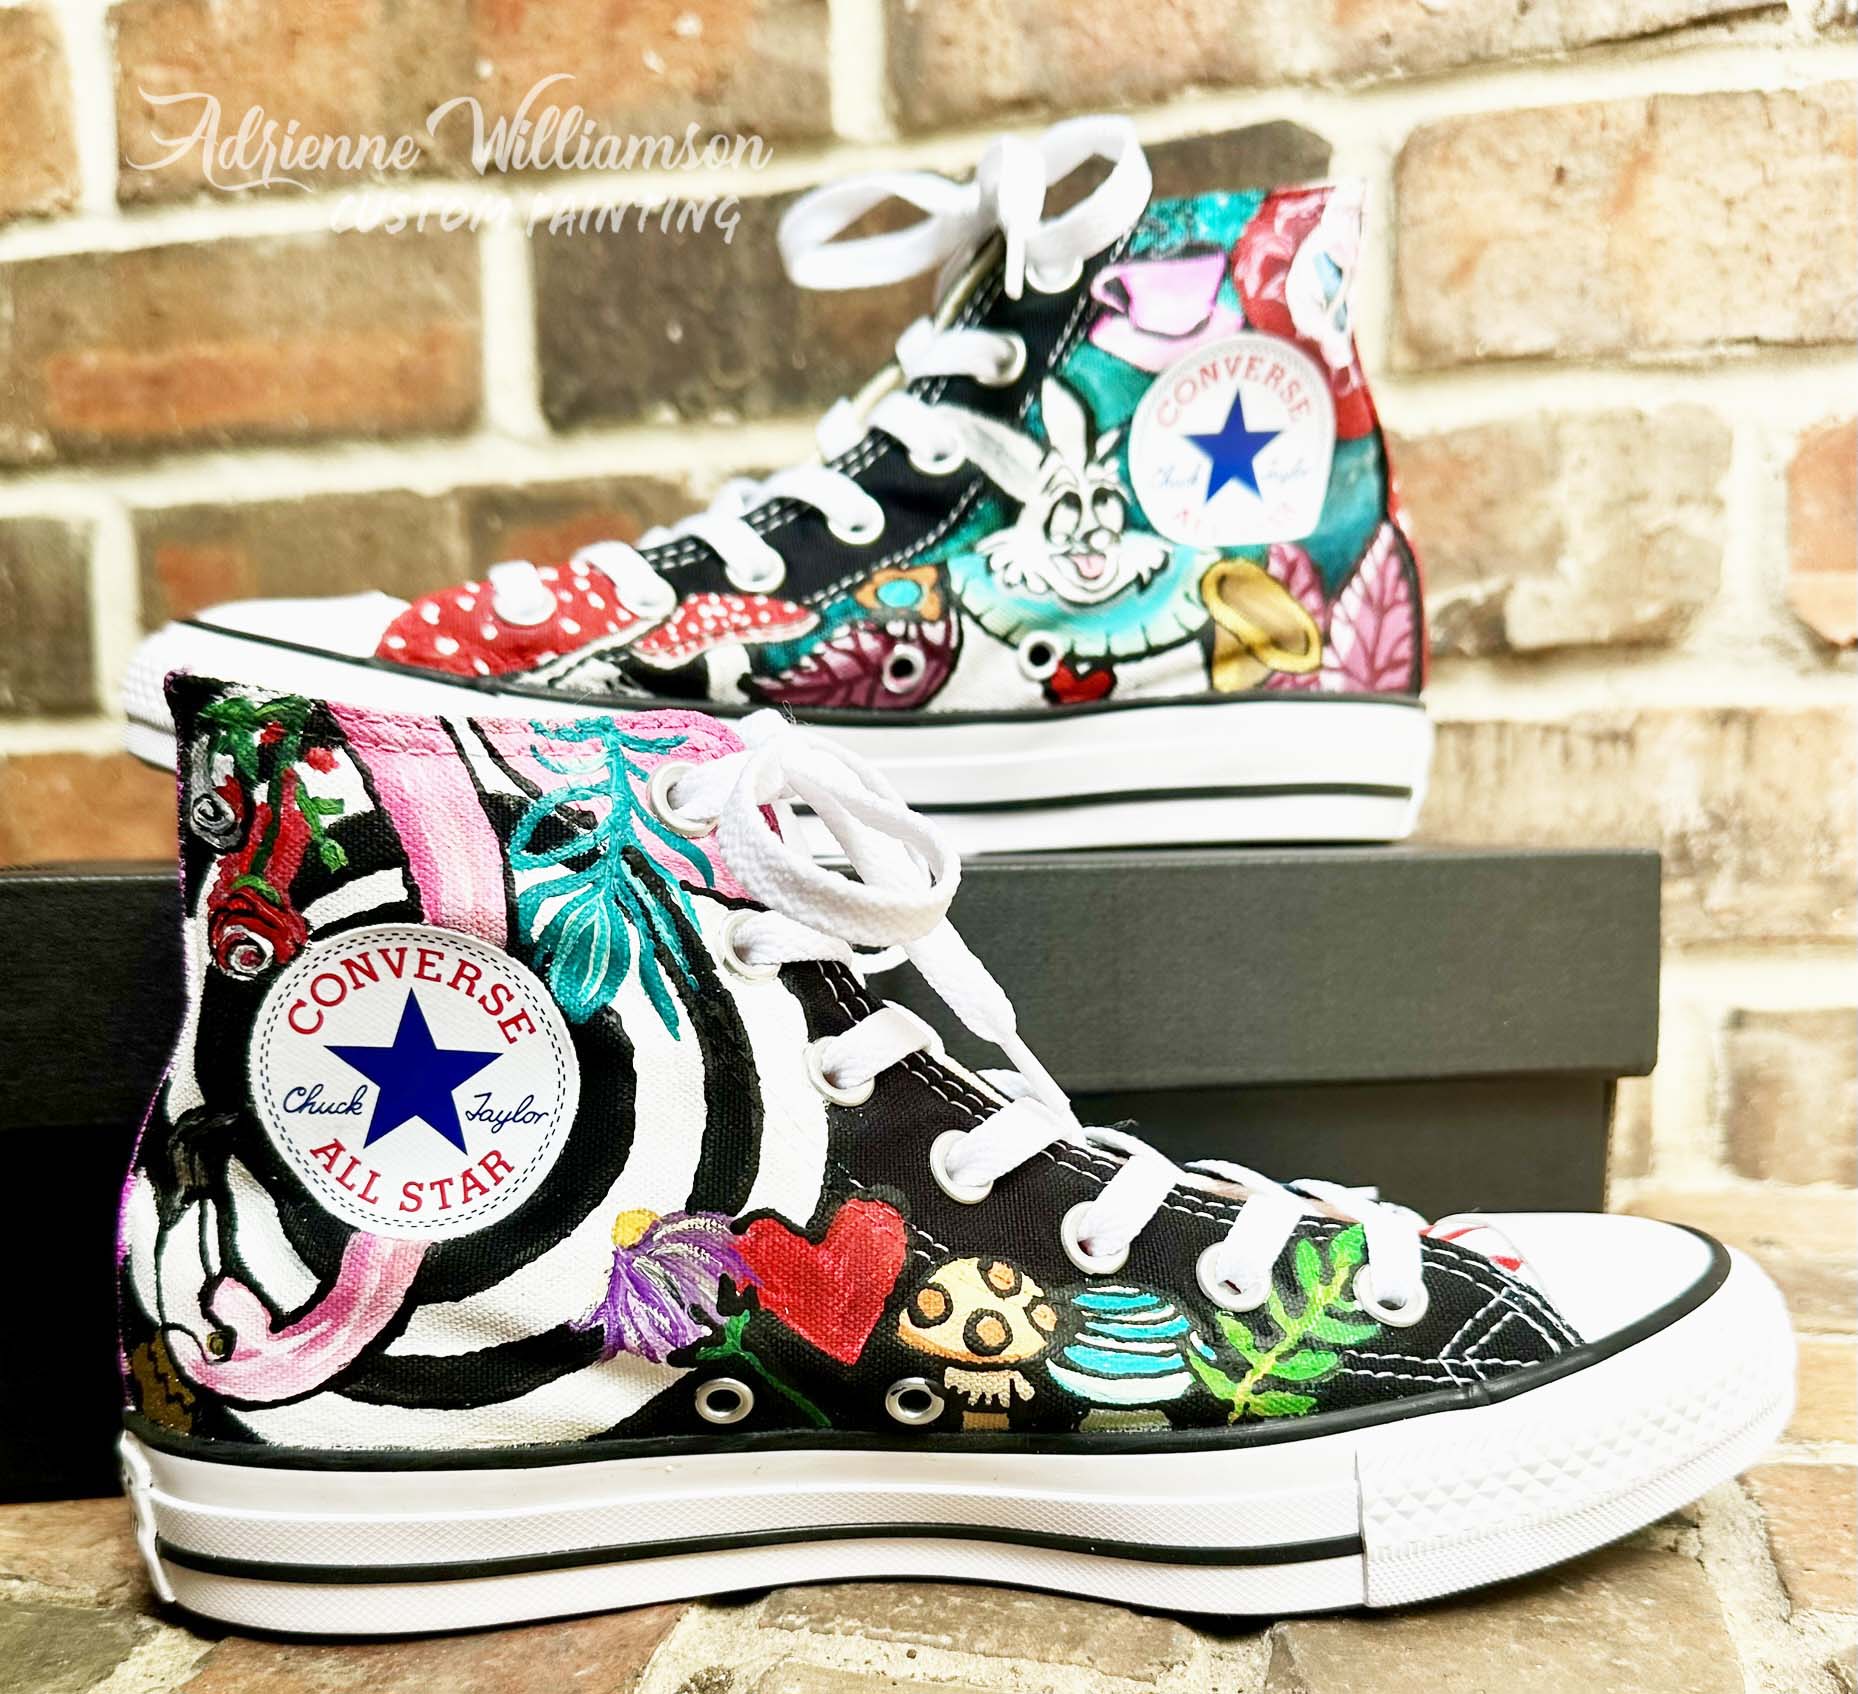 pair of Converse painted with wonderland theme on the in side of the shoes